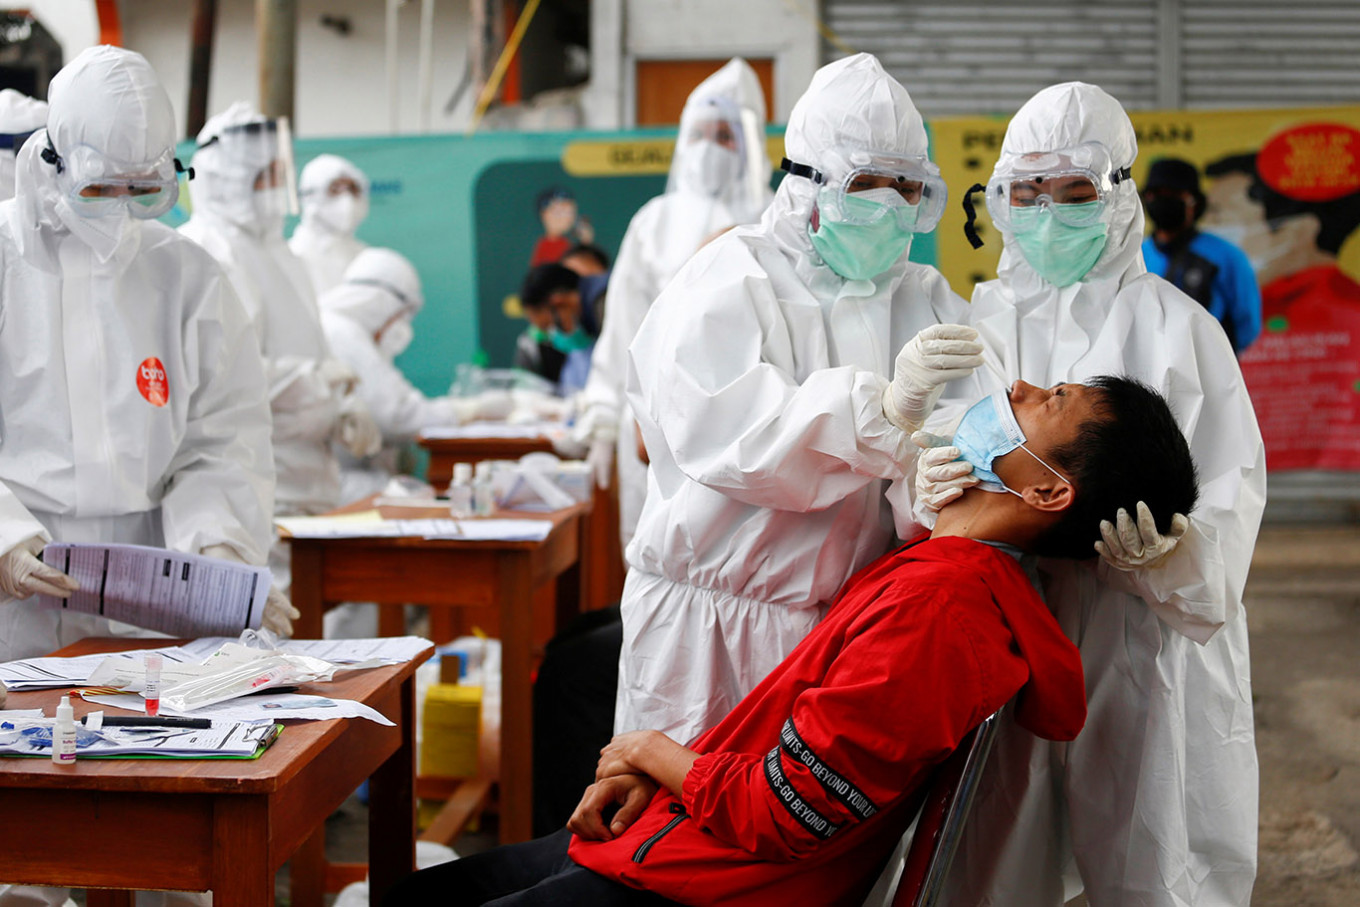 Epidemiologist says if Indonesia needs a plan to avoid pandemic trap